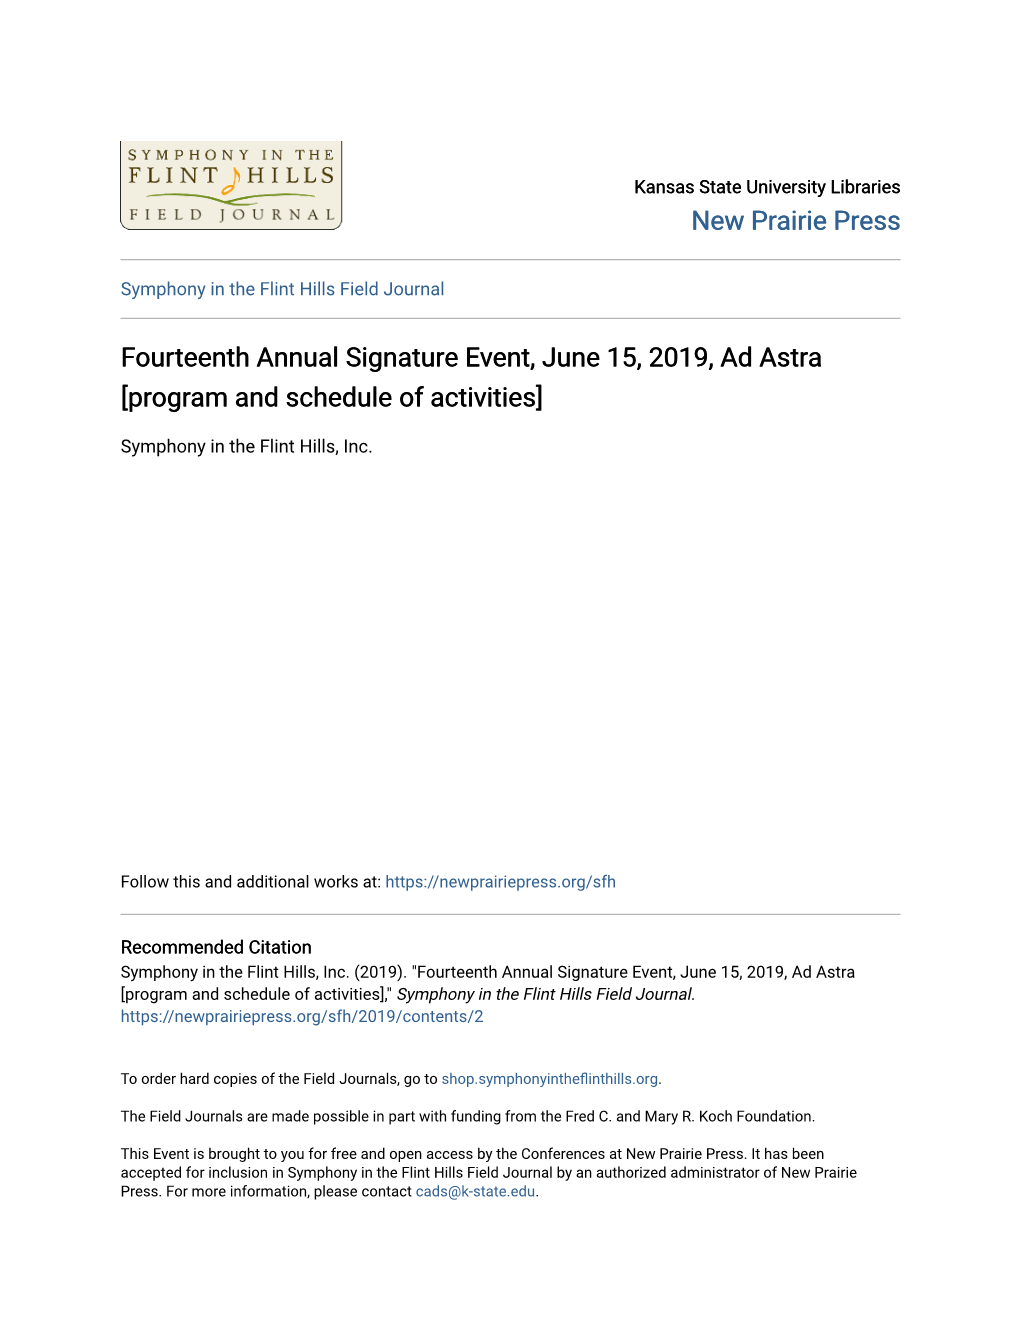 Fourteenth Annual Signature Event, June 15, 2019, Ad Astra [Program and Schedule of Activities]